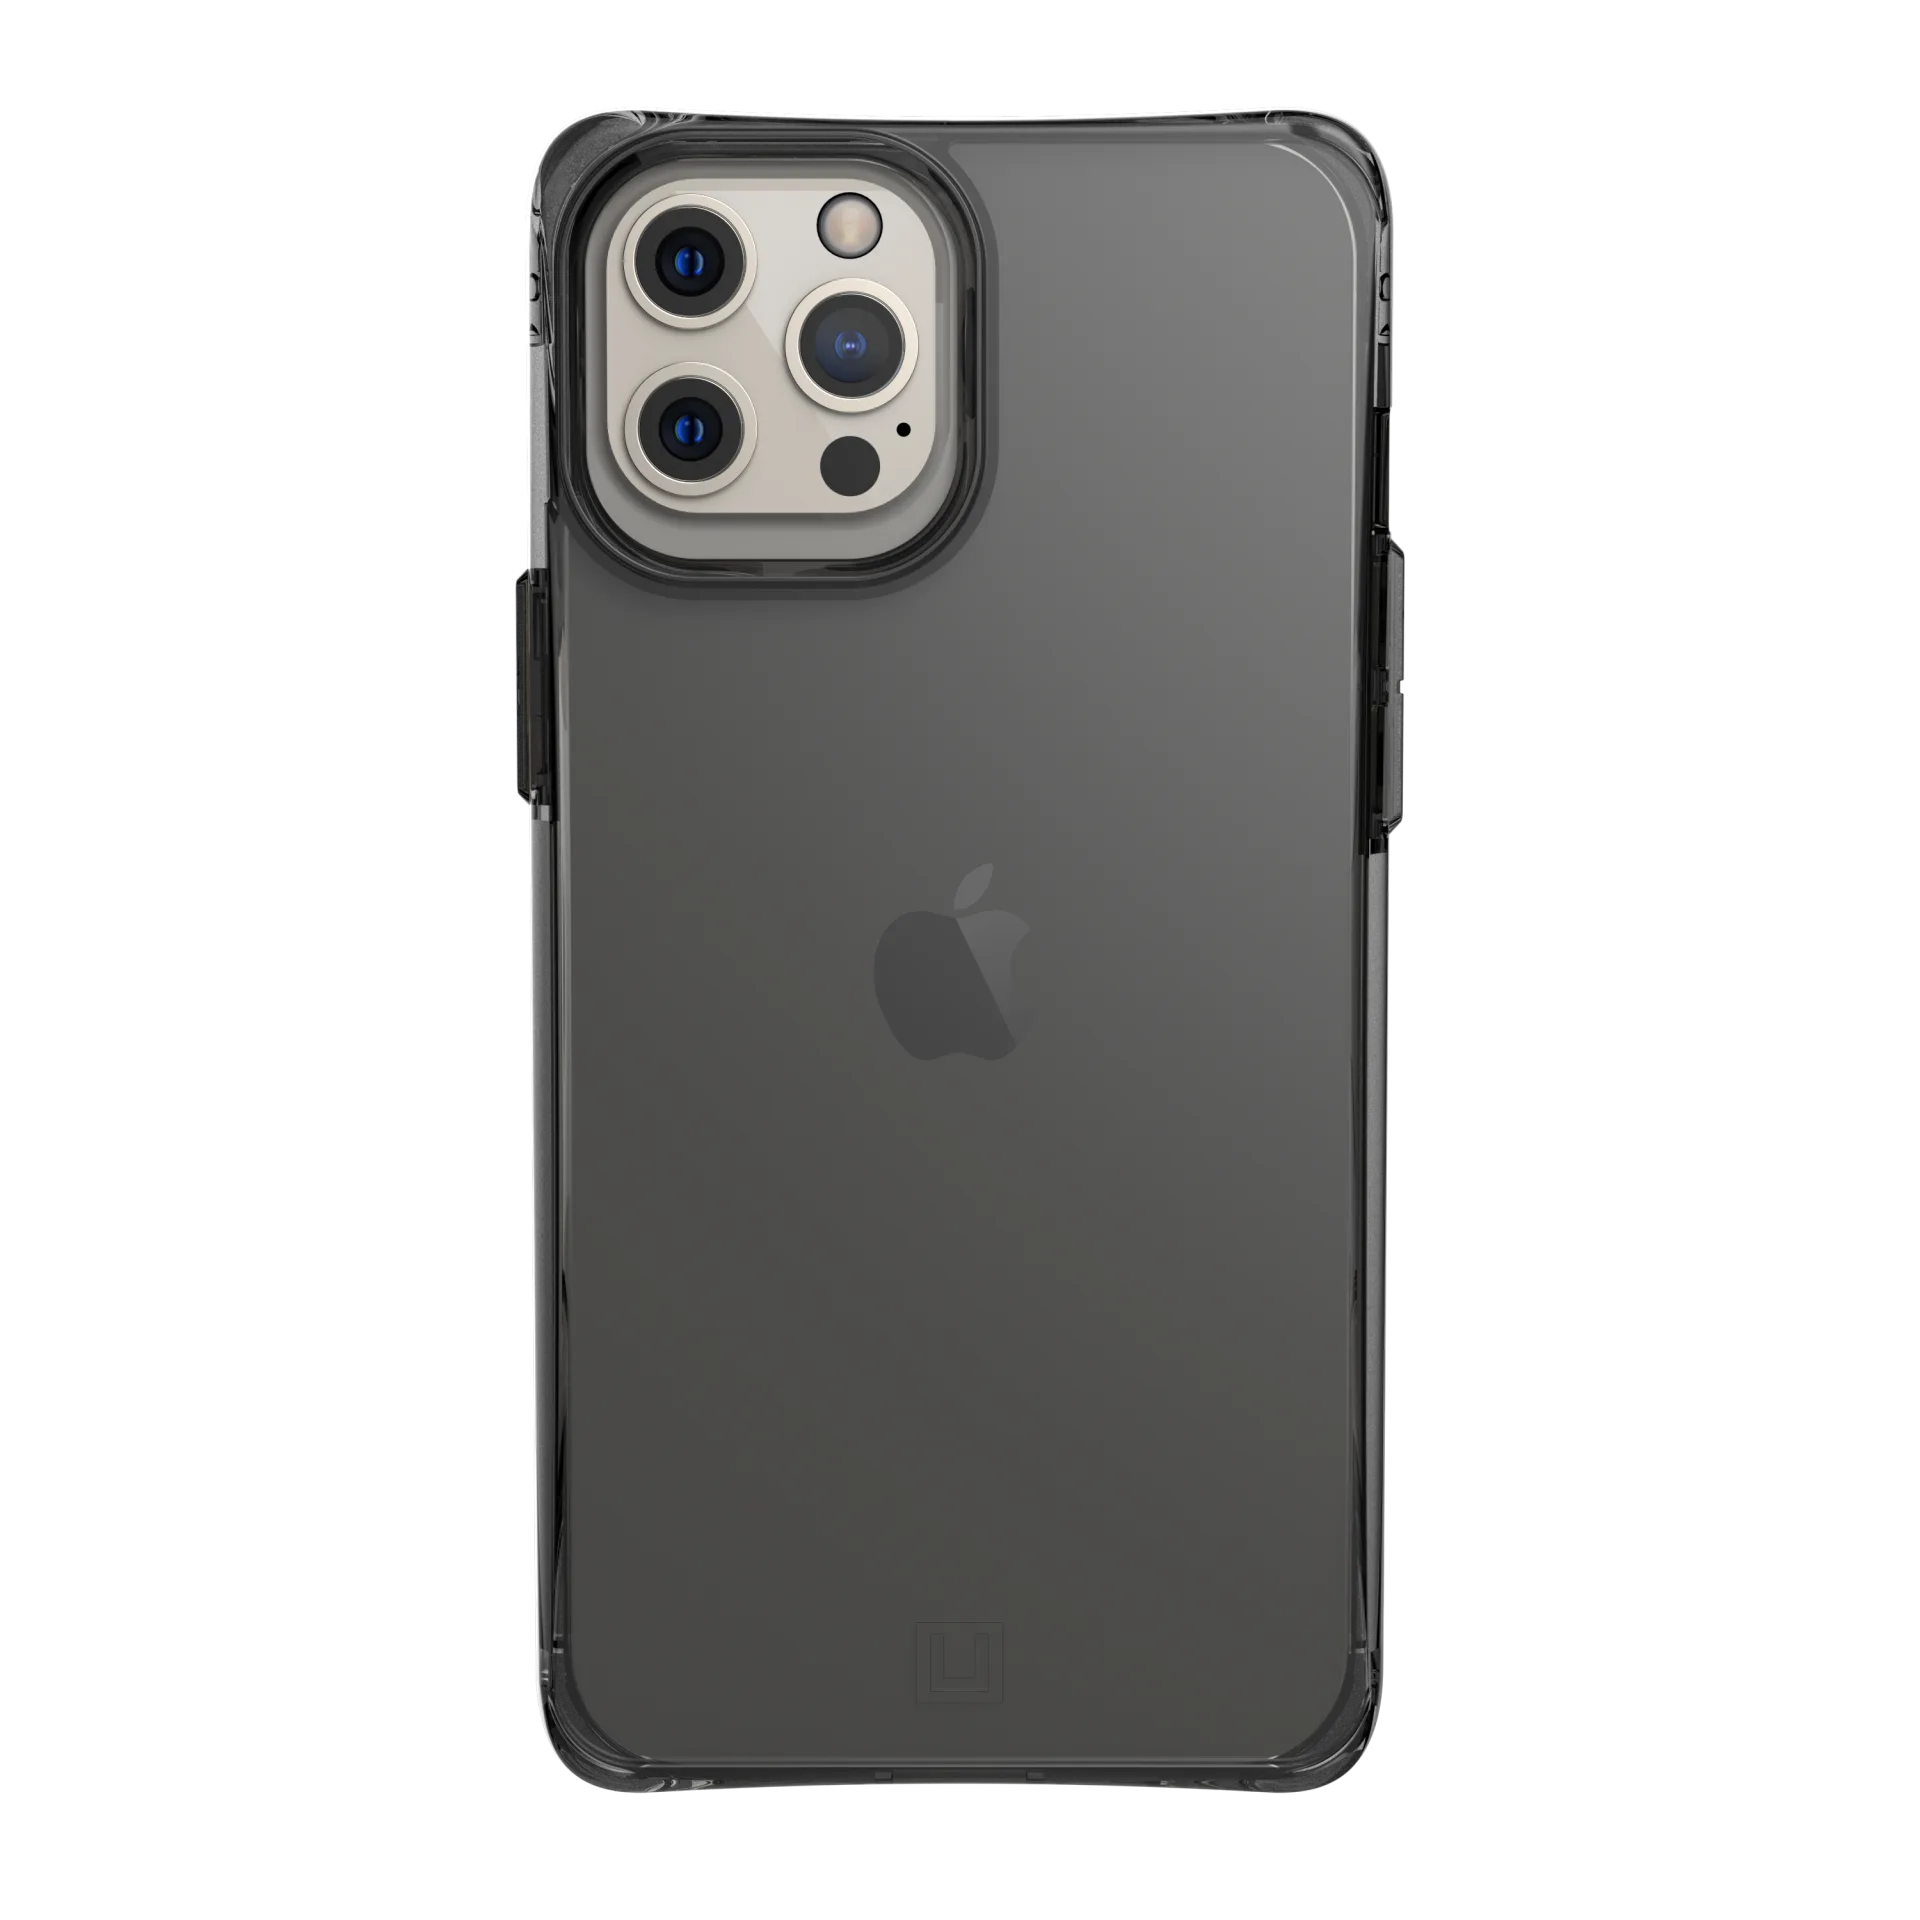 Urban Armor Gear U Protection Case for iPhone 12 Pro Max